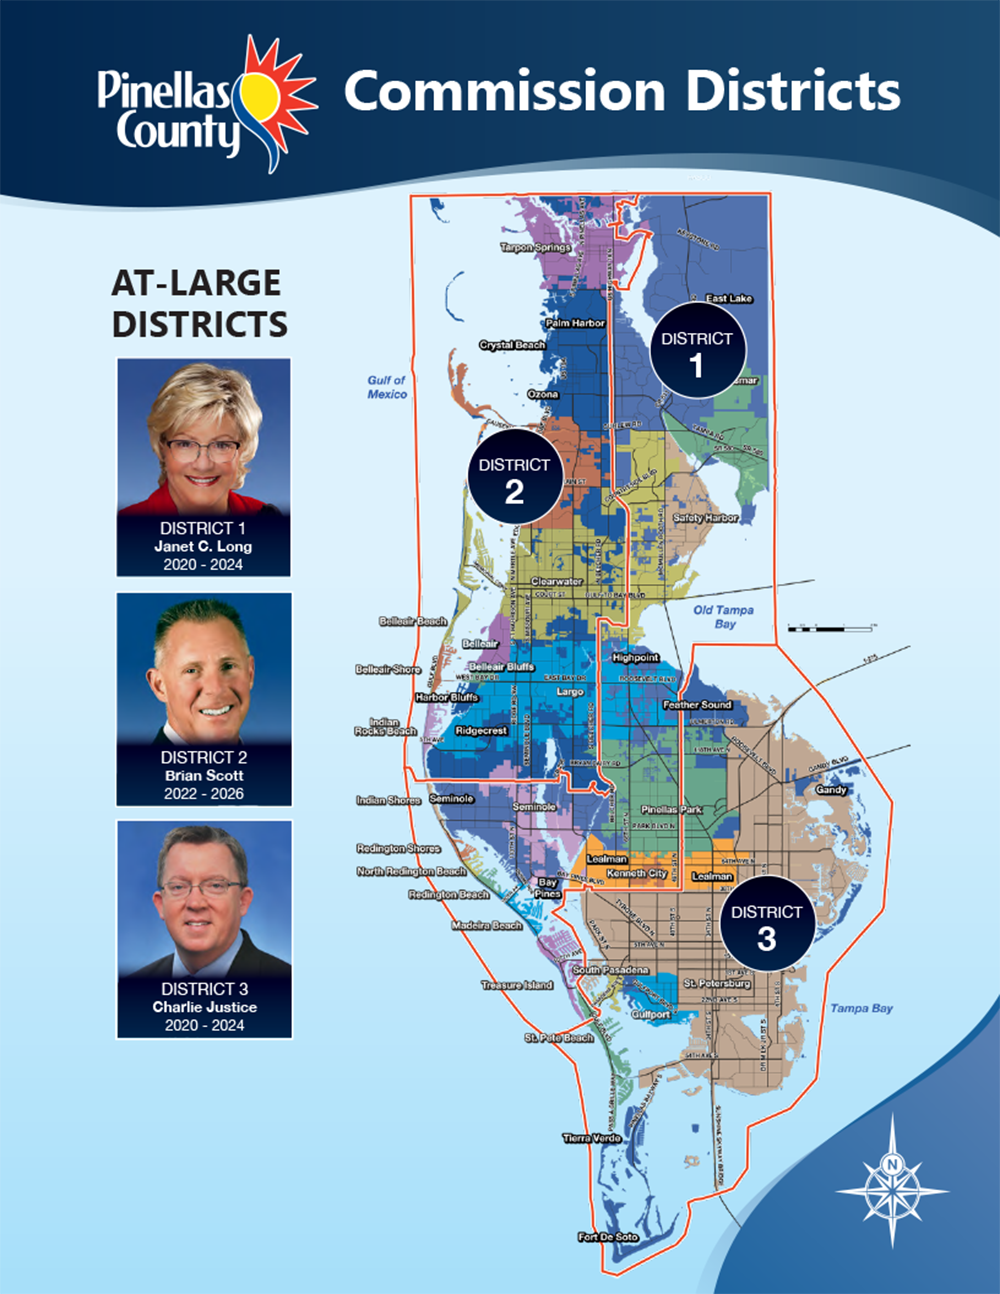 At-large commission districts map with photos of Pinellas County Commissioners